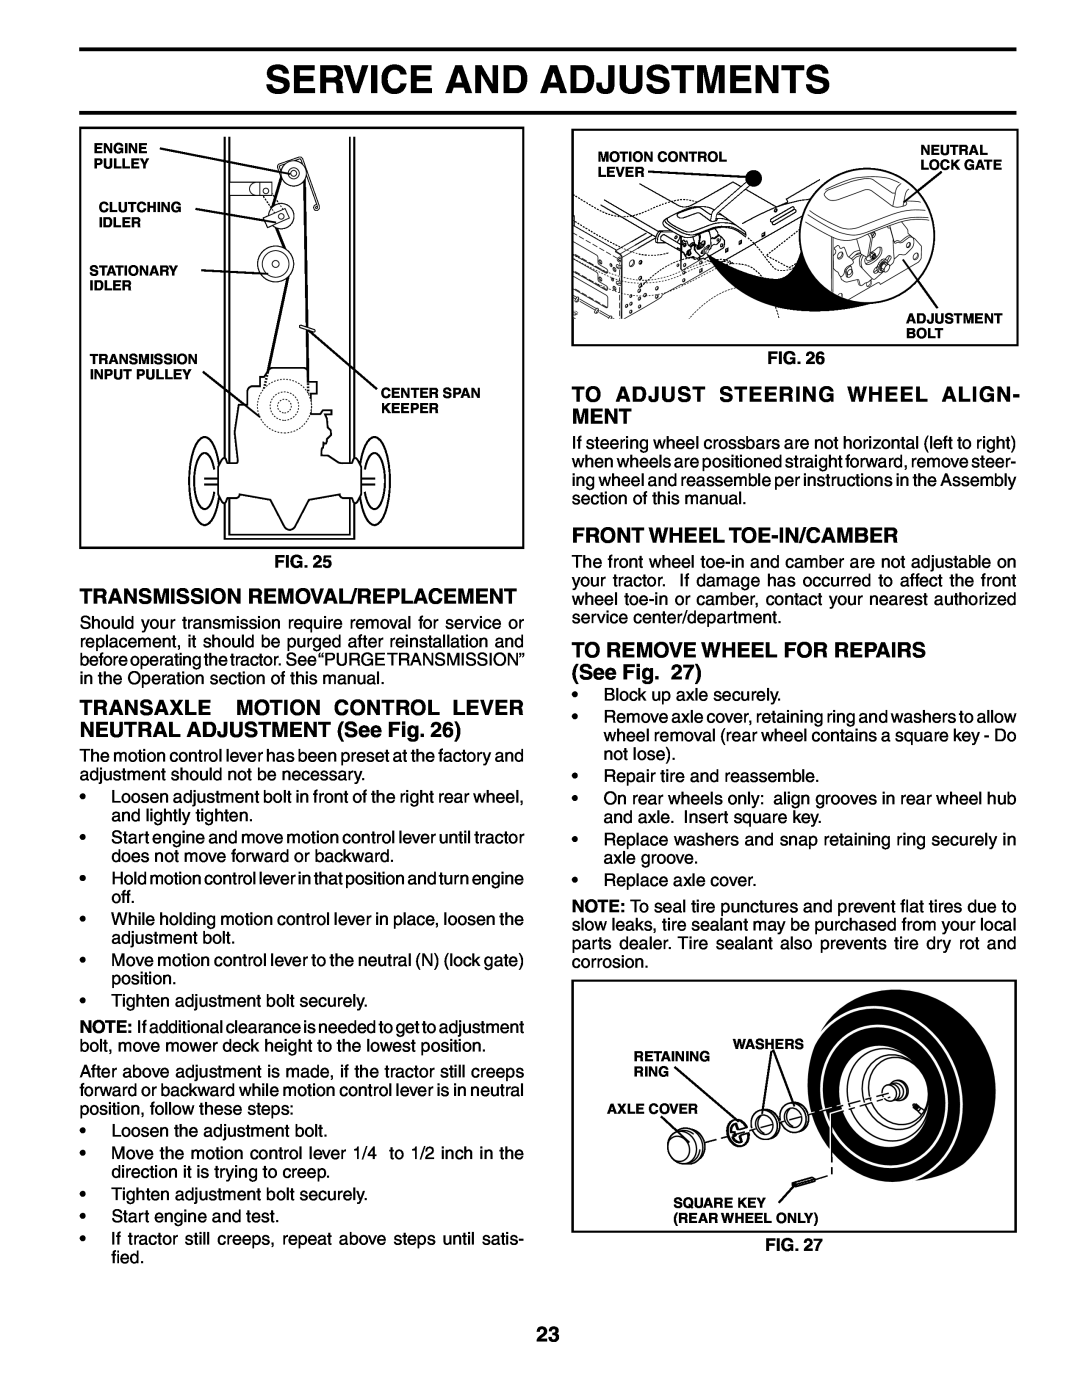 Poulan 184617 owner manual Transmission Removal/Replacement, TRANSAXLE MOTION CONTROL LEVER NEUTRAL ADJUSTMENT See Fig 